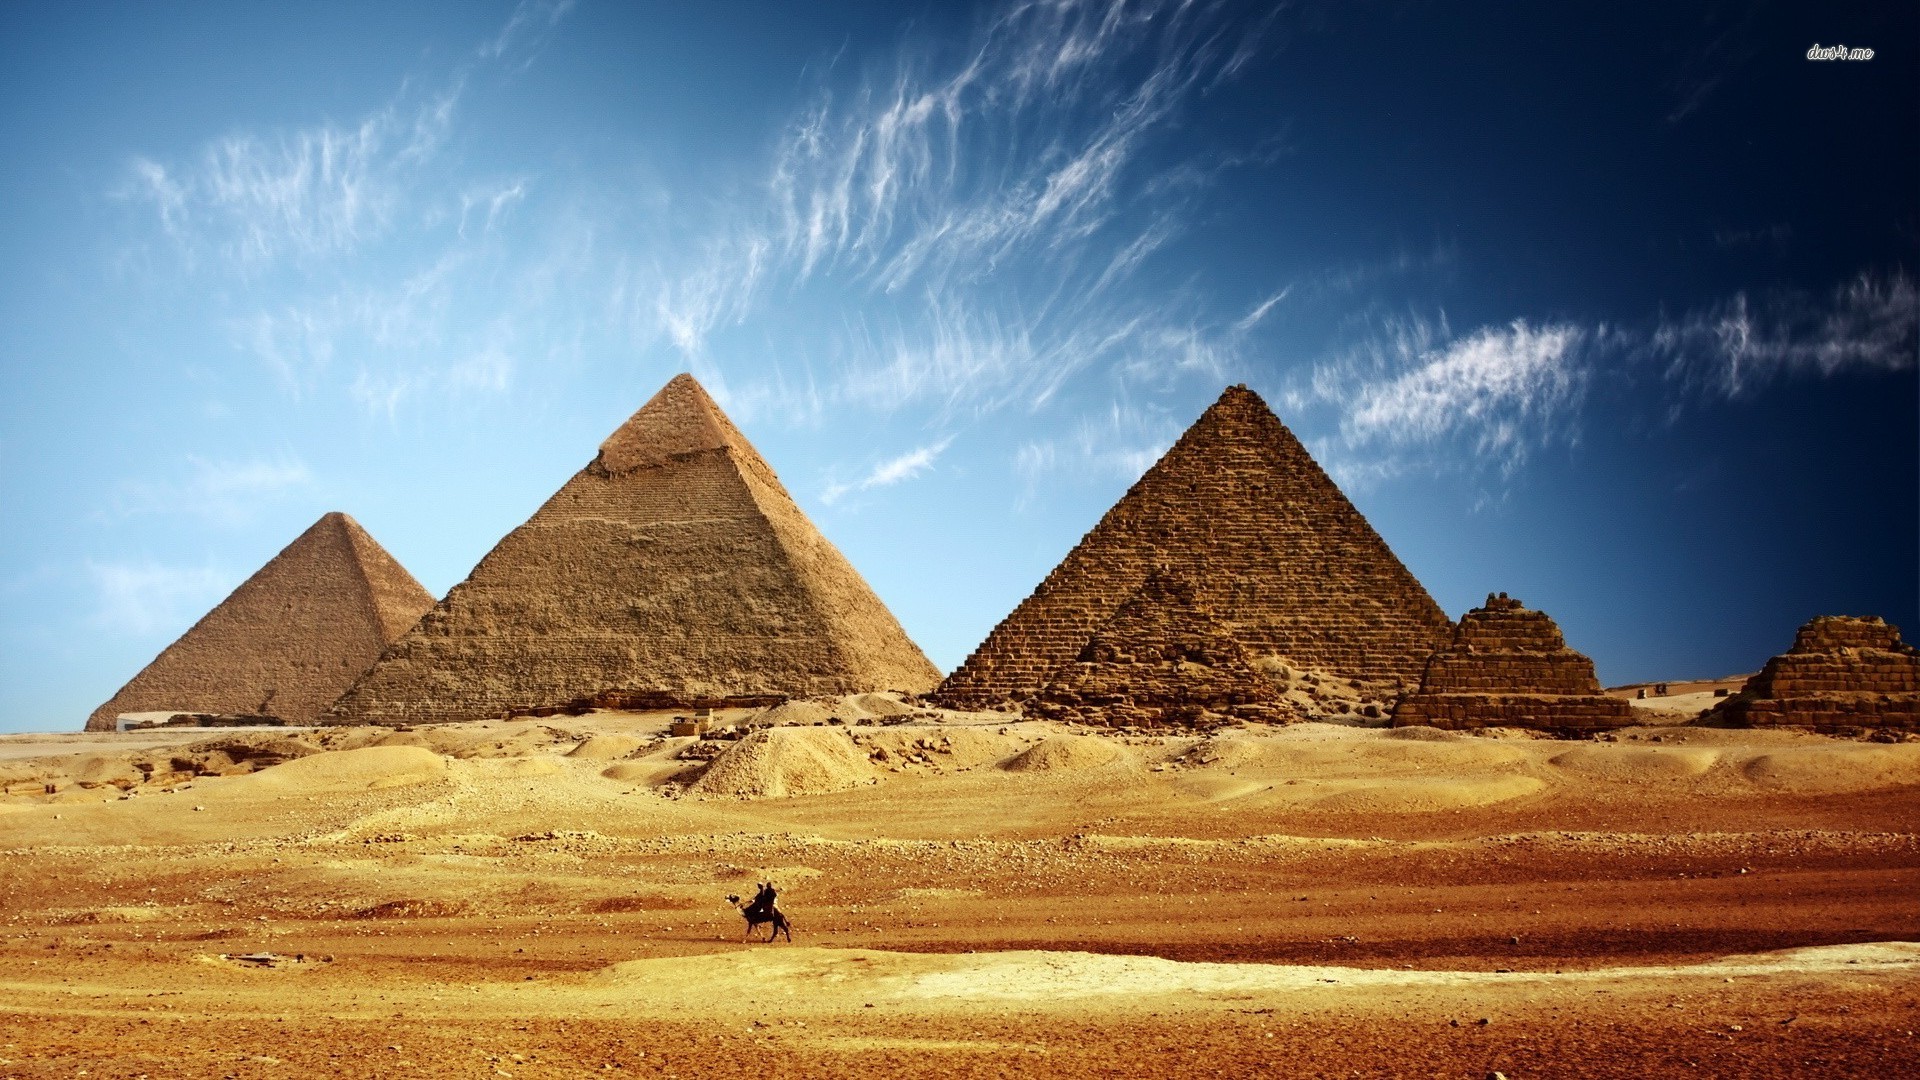 Pyramid Wallpaper   Desktop Background Download HD Wallpapers for